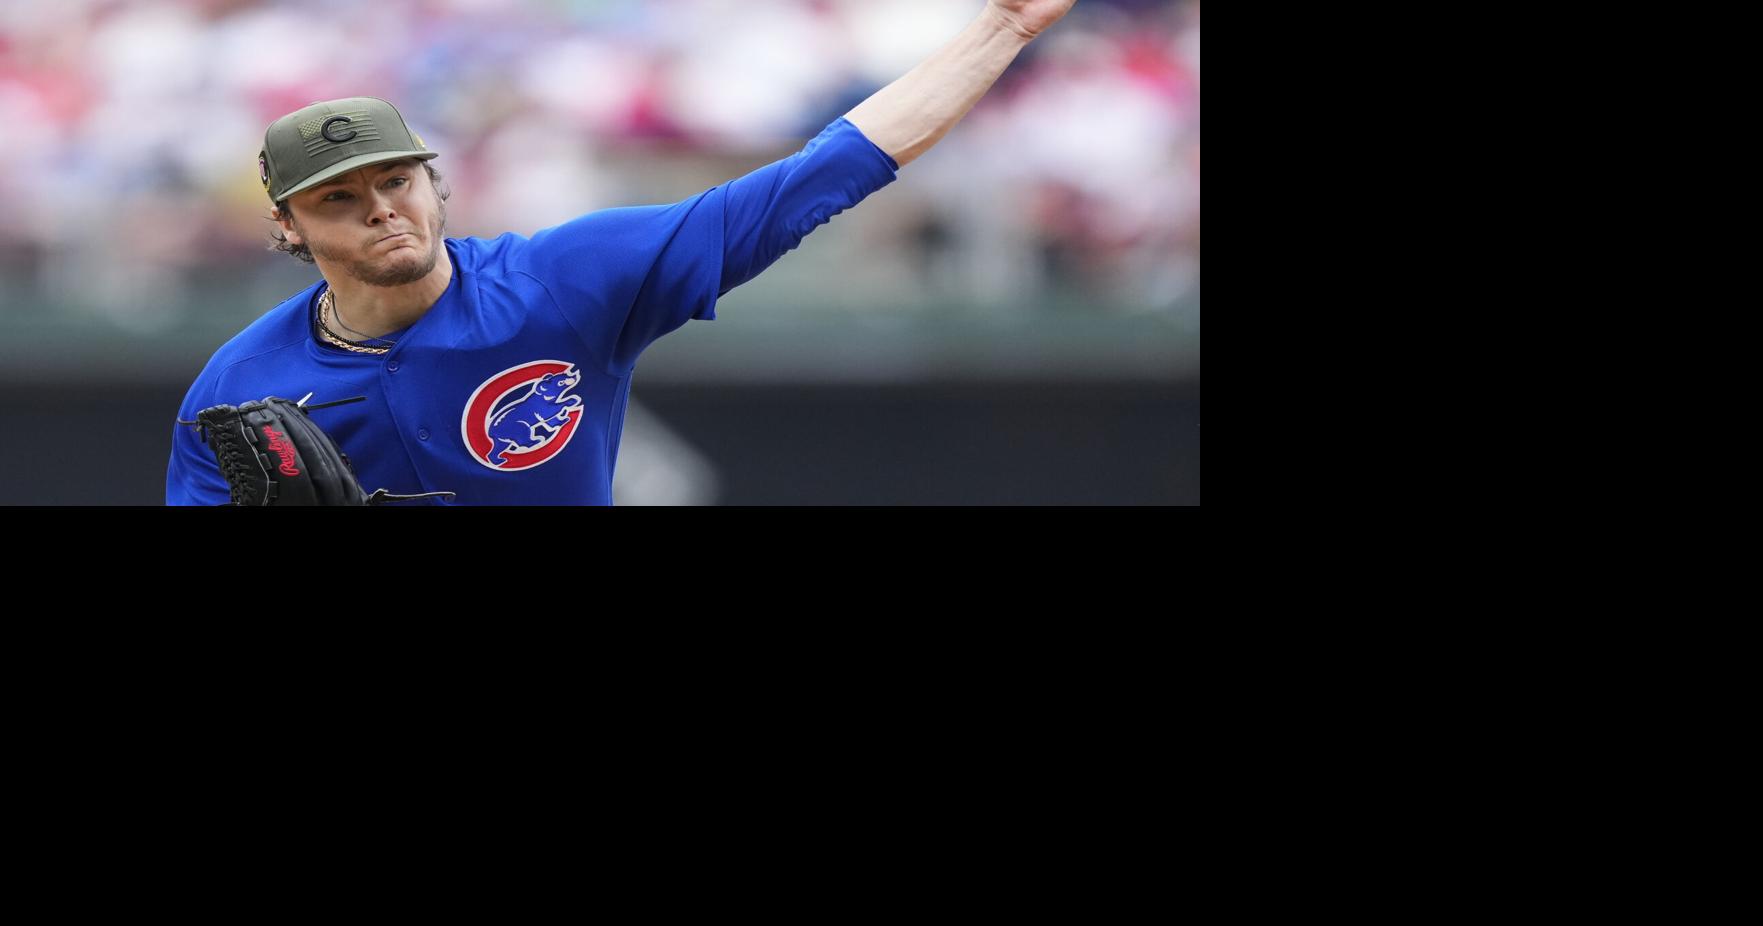 Suzuki set to join Iowa Cubs; pitchers could follow